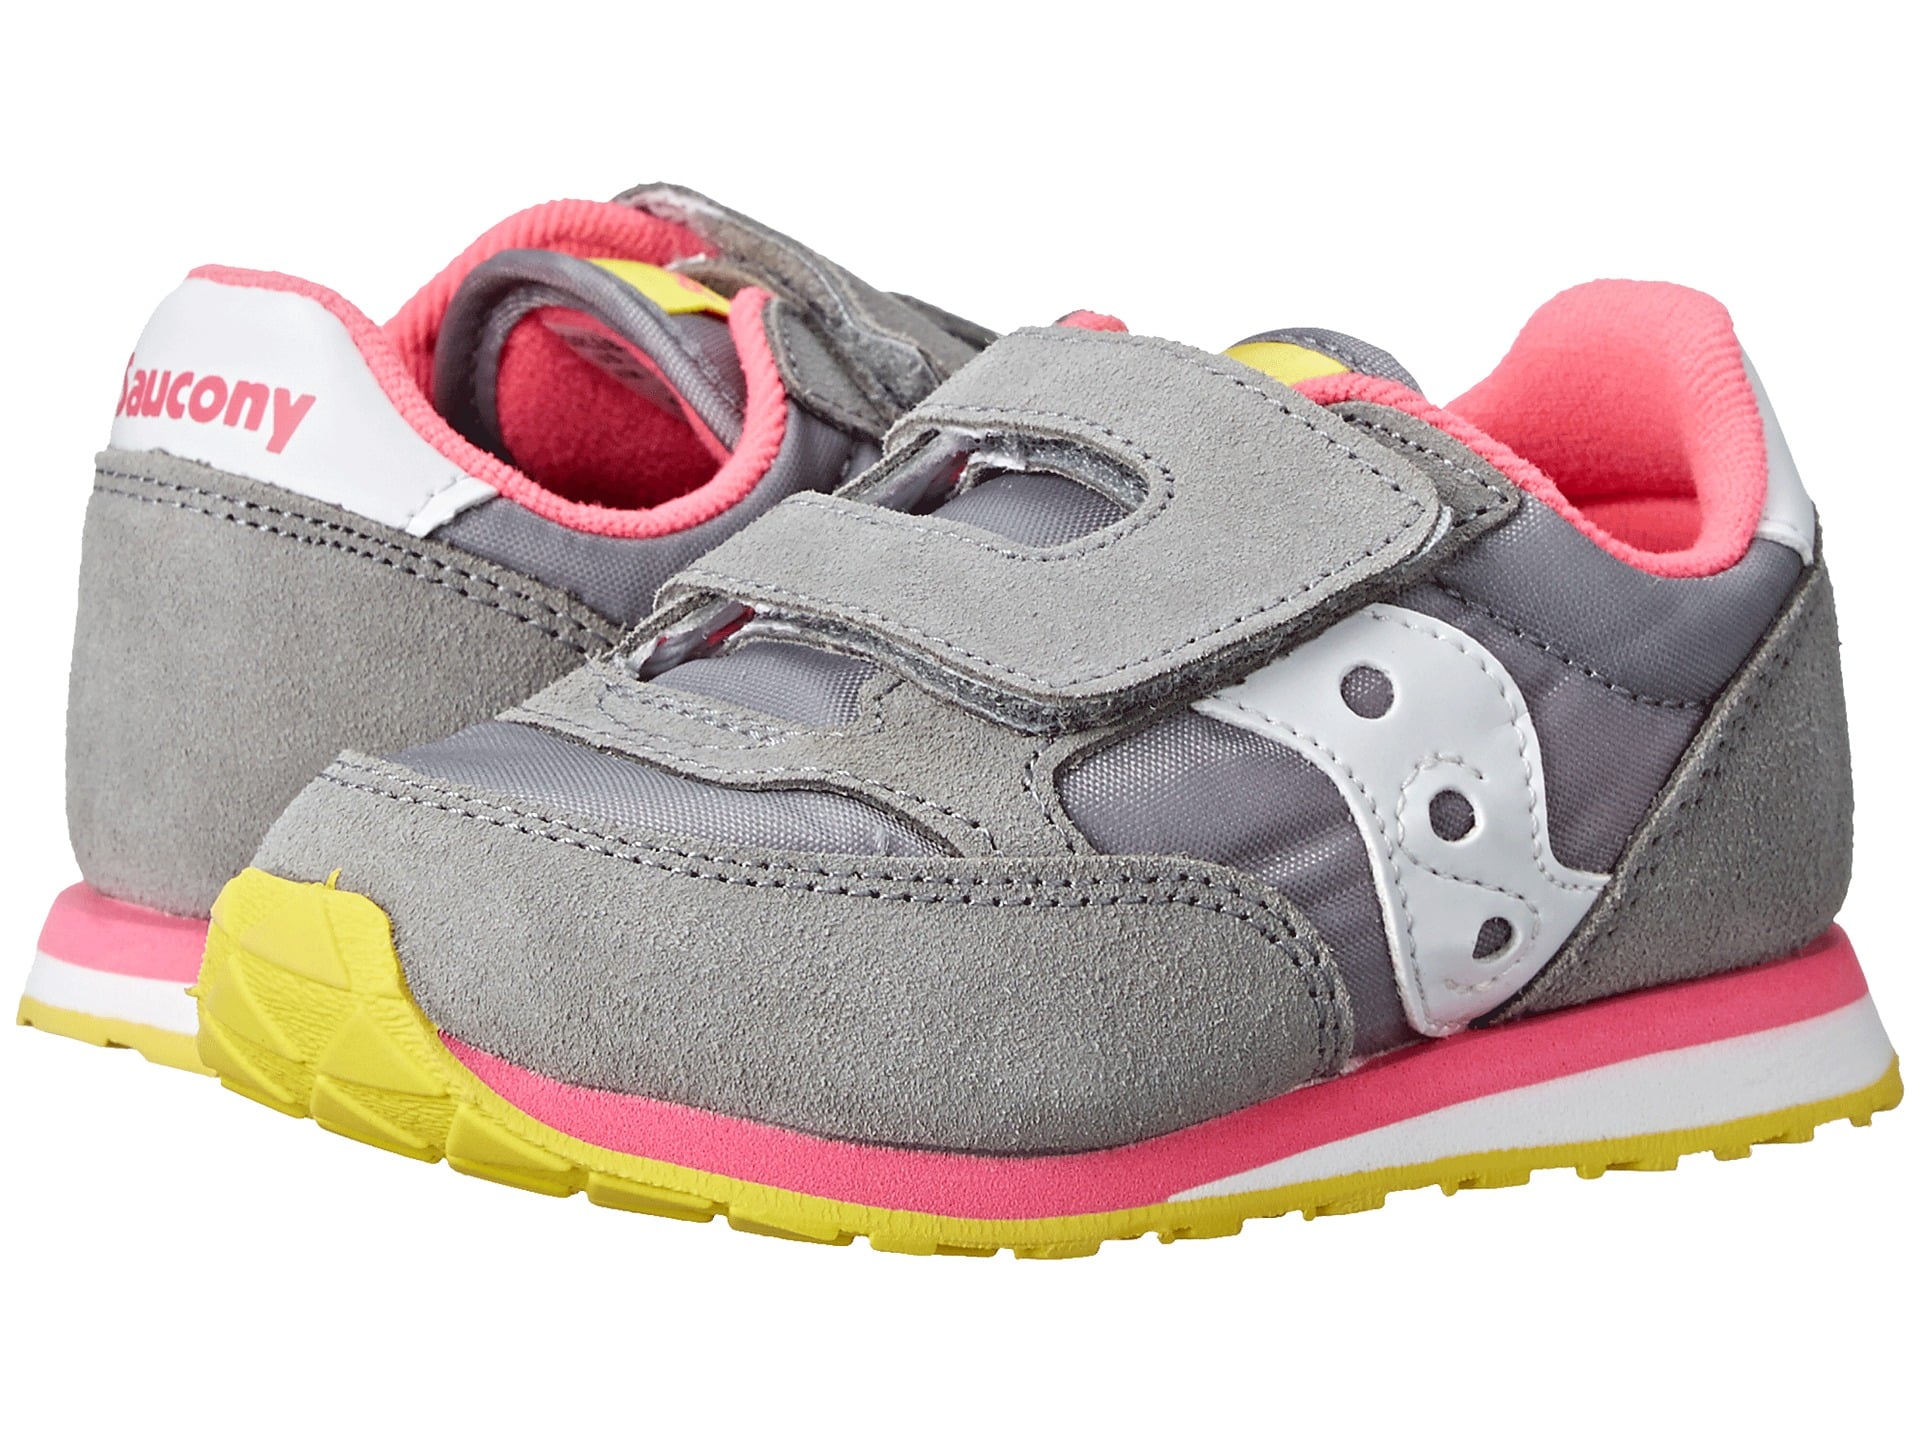 saucony sneakers for toddlers